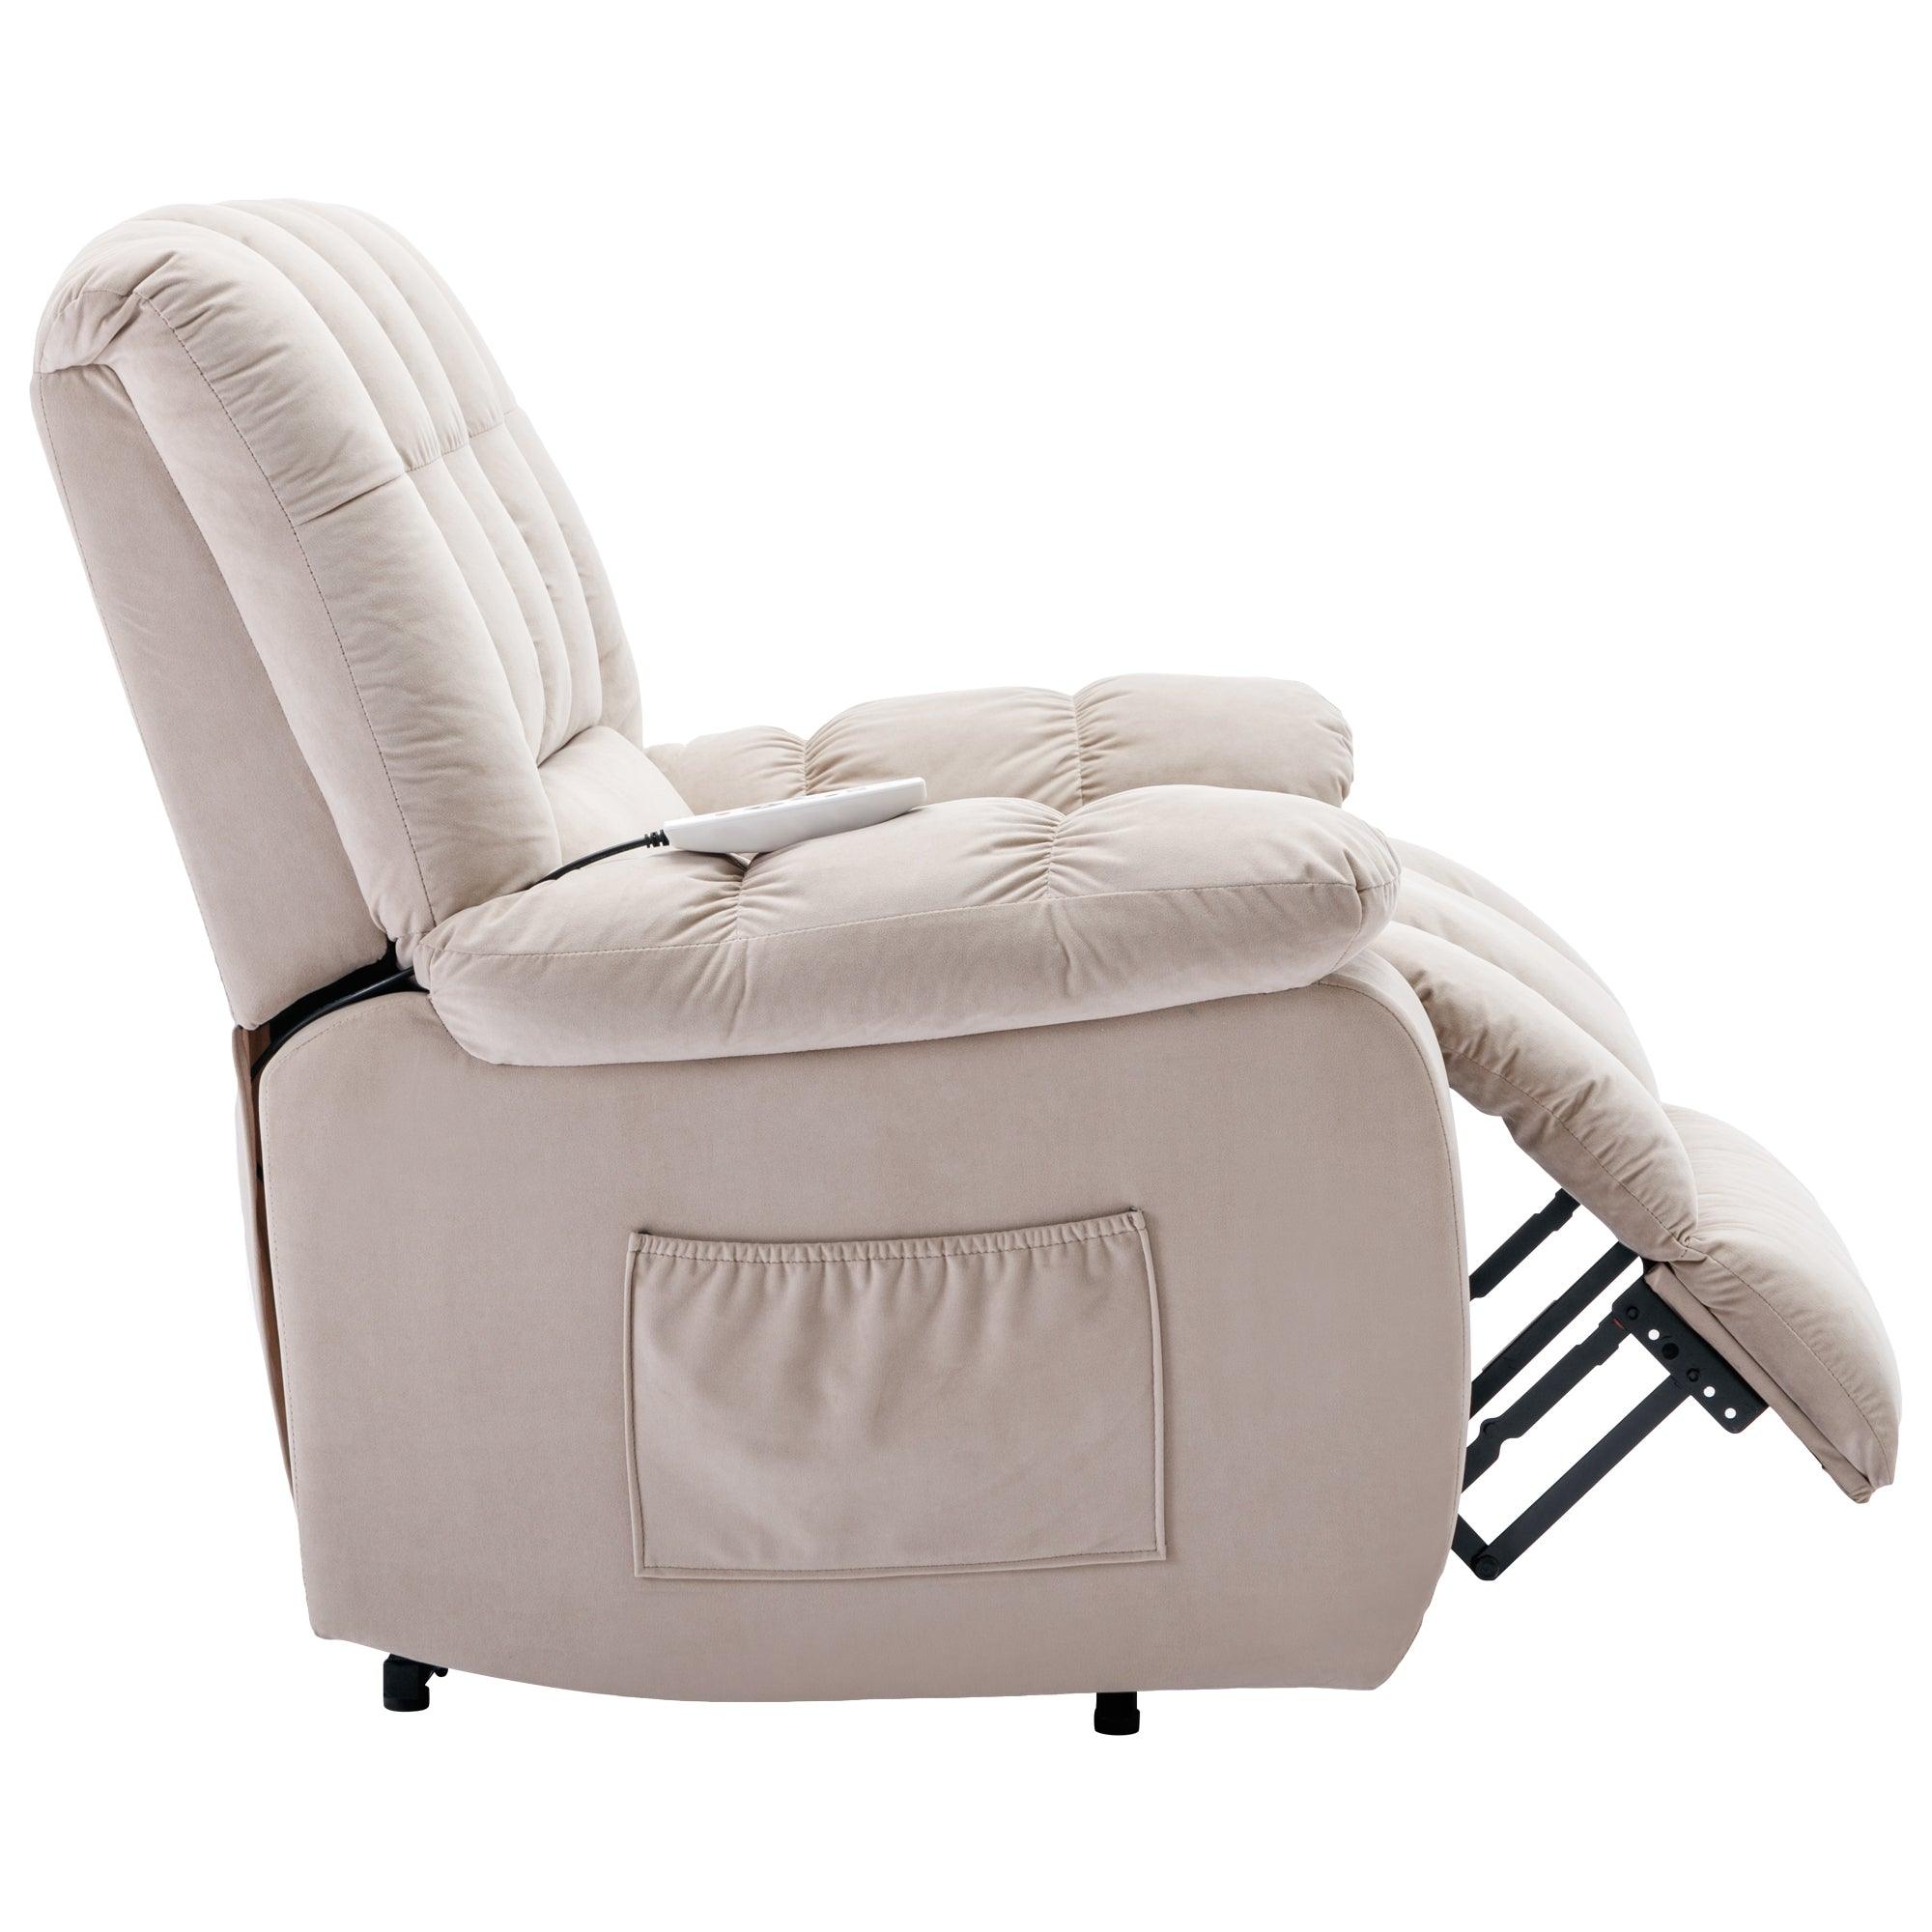 Beige Massage Lift Chair Recliner, side view with footrest extending